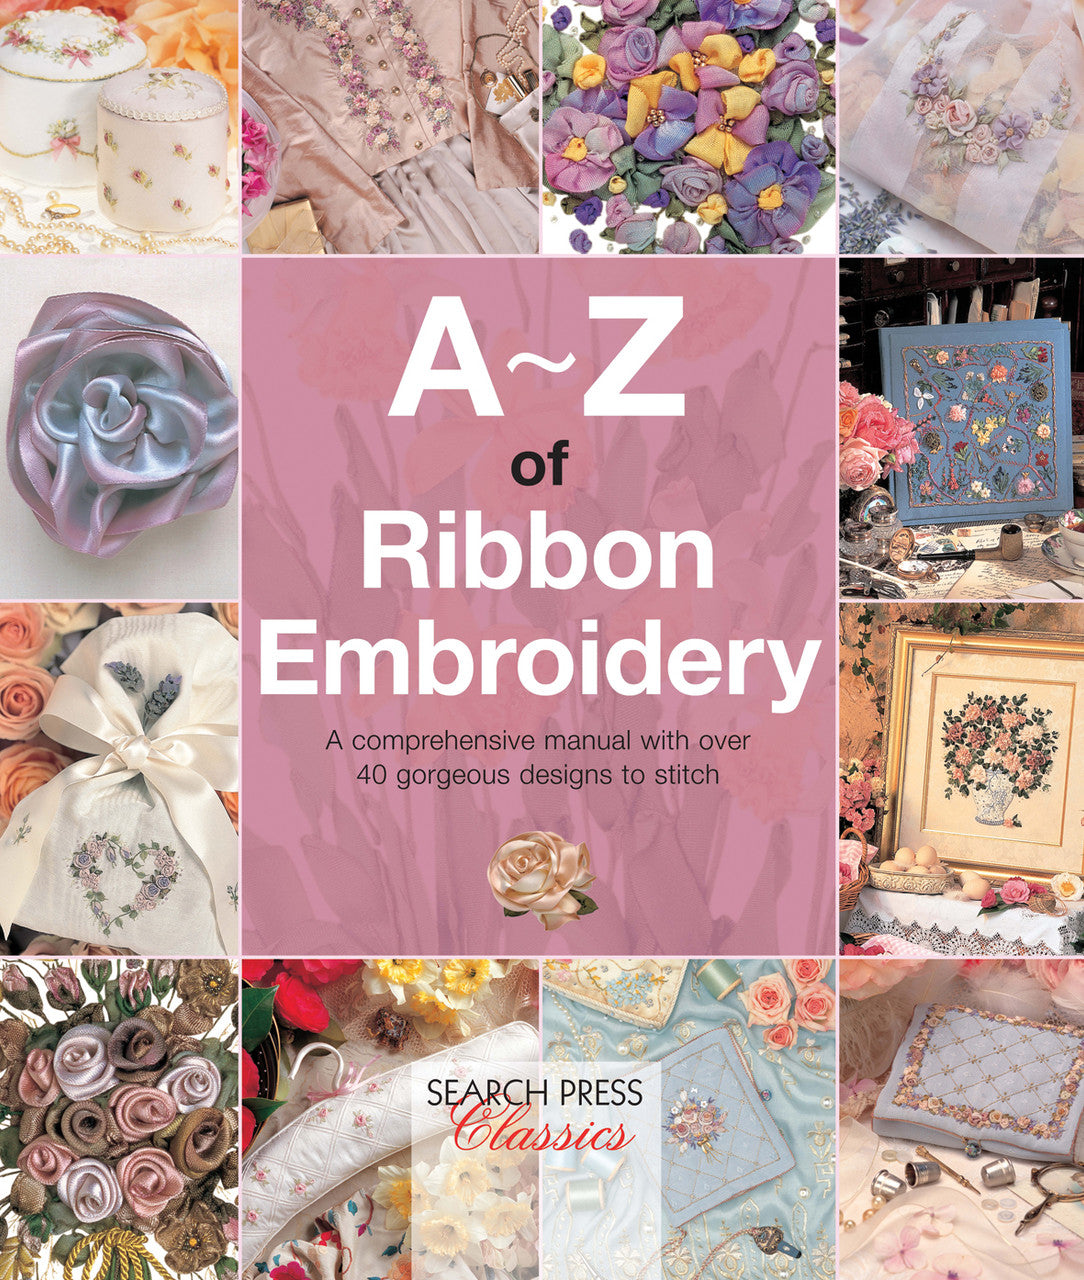 A - Z of Ribbon Embroidery Book by Country Bumpkin